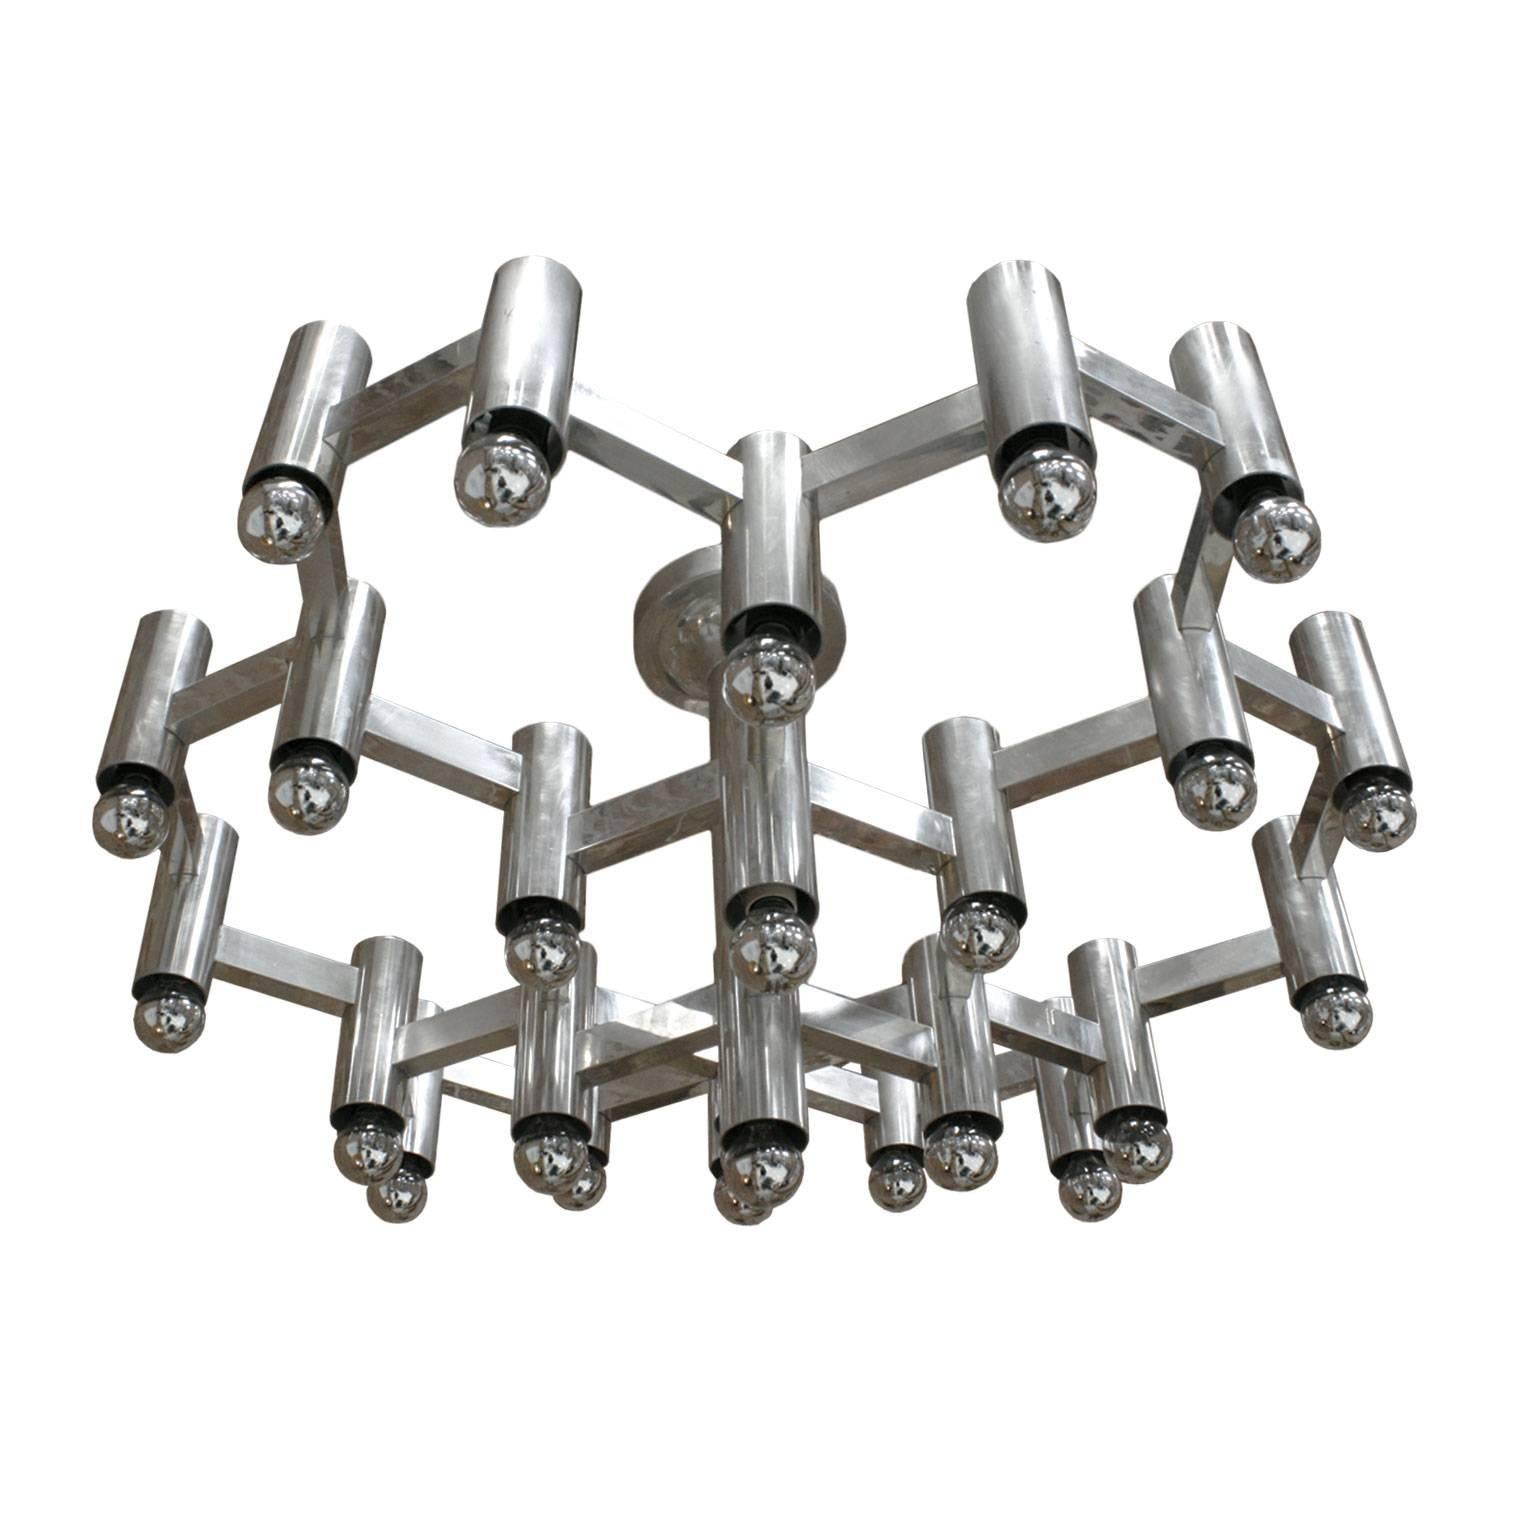 Italian pendant lamp designed by Gaetano Sciolari in 1970s. Structure made of steel. Composed of 24 points of light.

Gaetano Sciolari was an Italian designer known for his Mid-Century Modern lighting fixtures. Born around the turn of the 20th